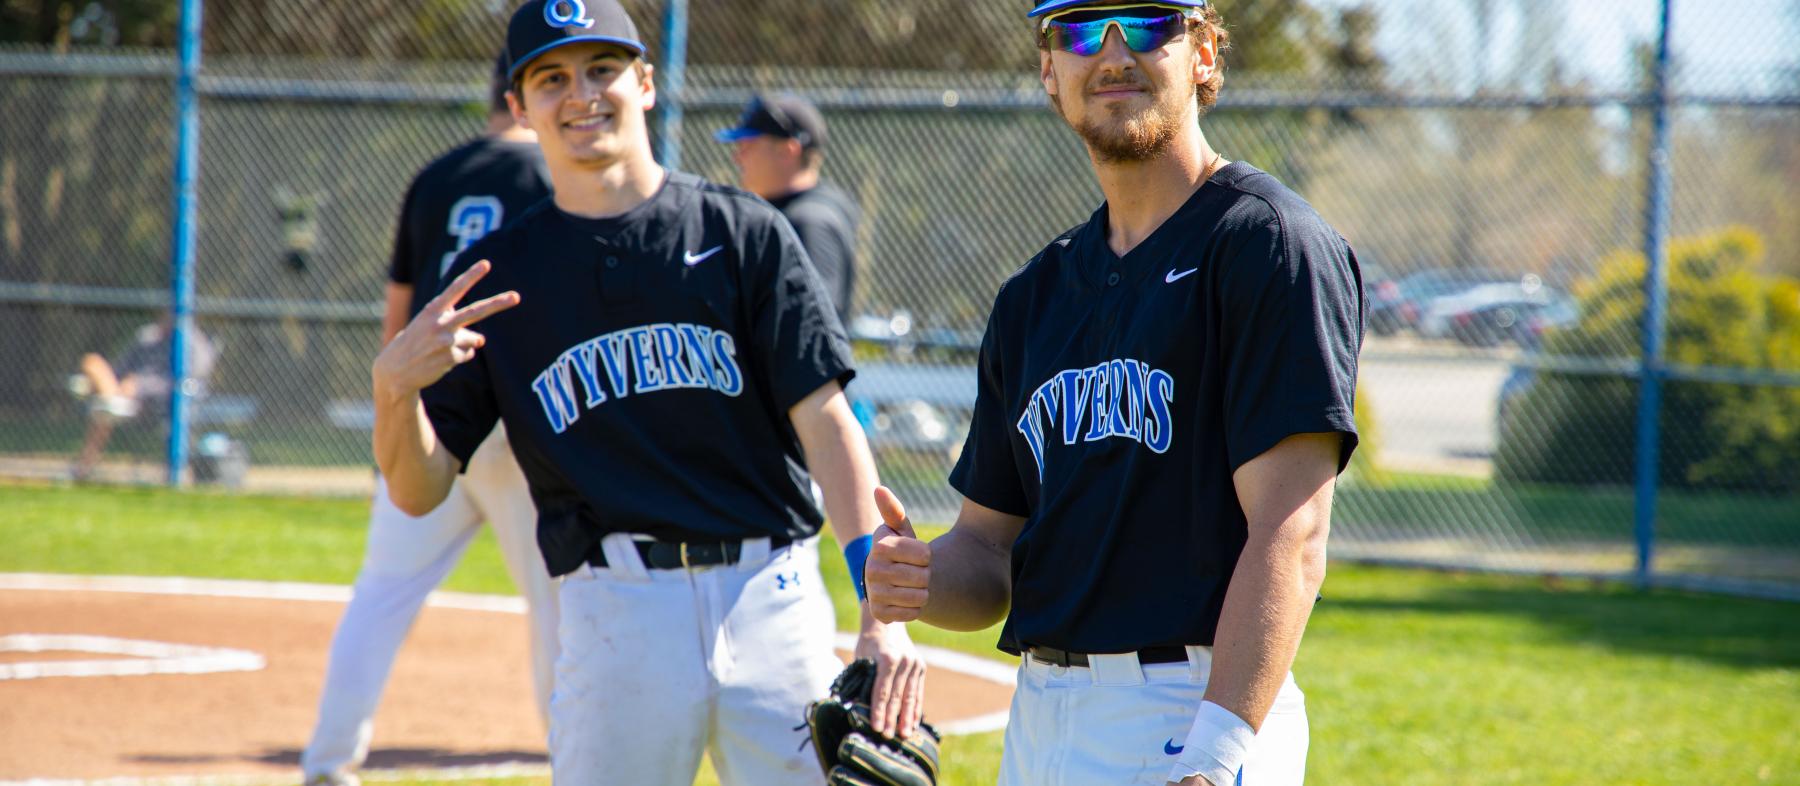 Two baseball players pose on field at a QCC Wyverns game.